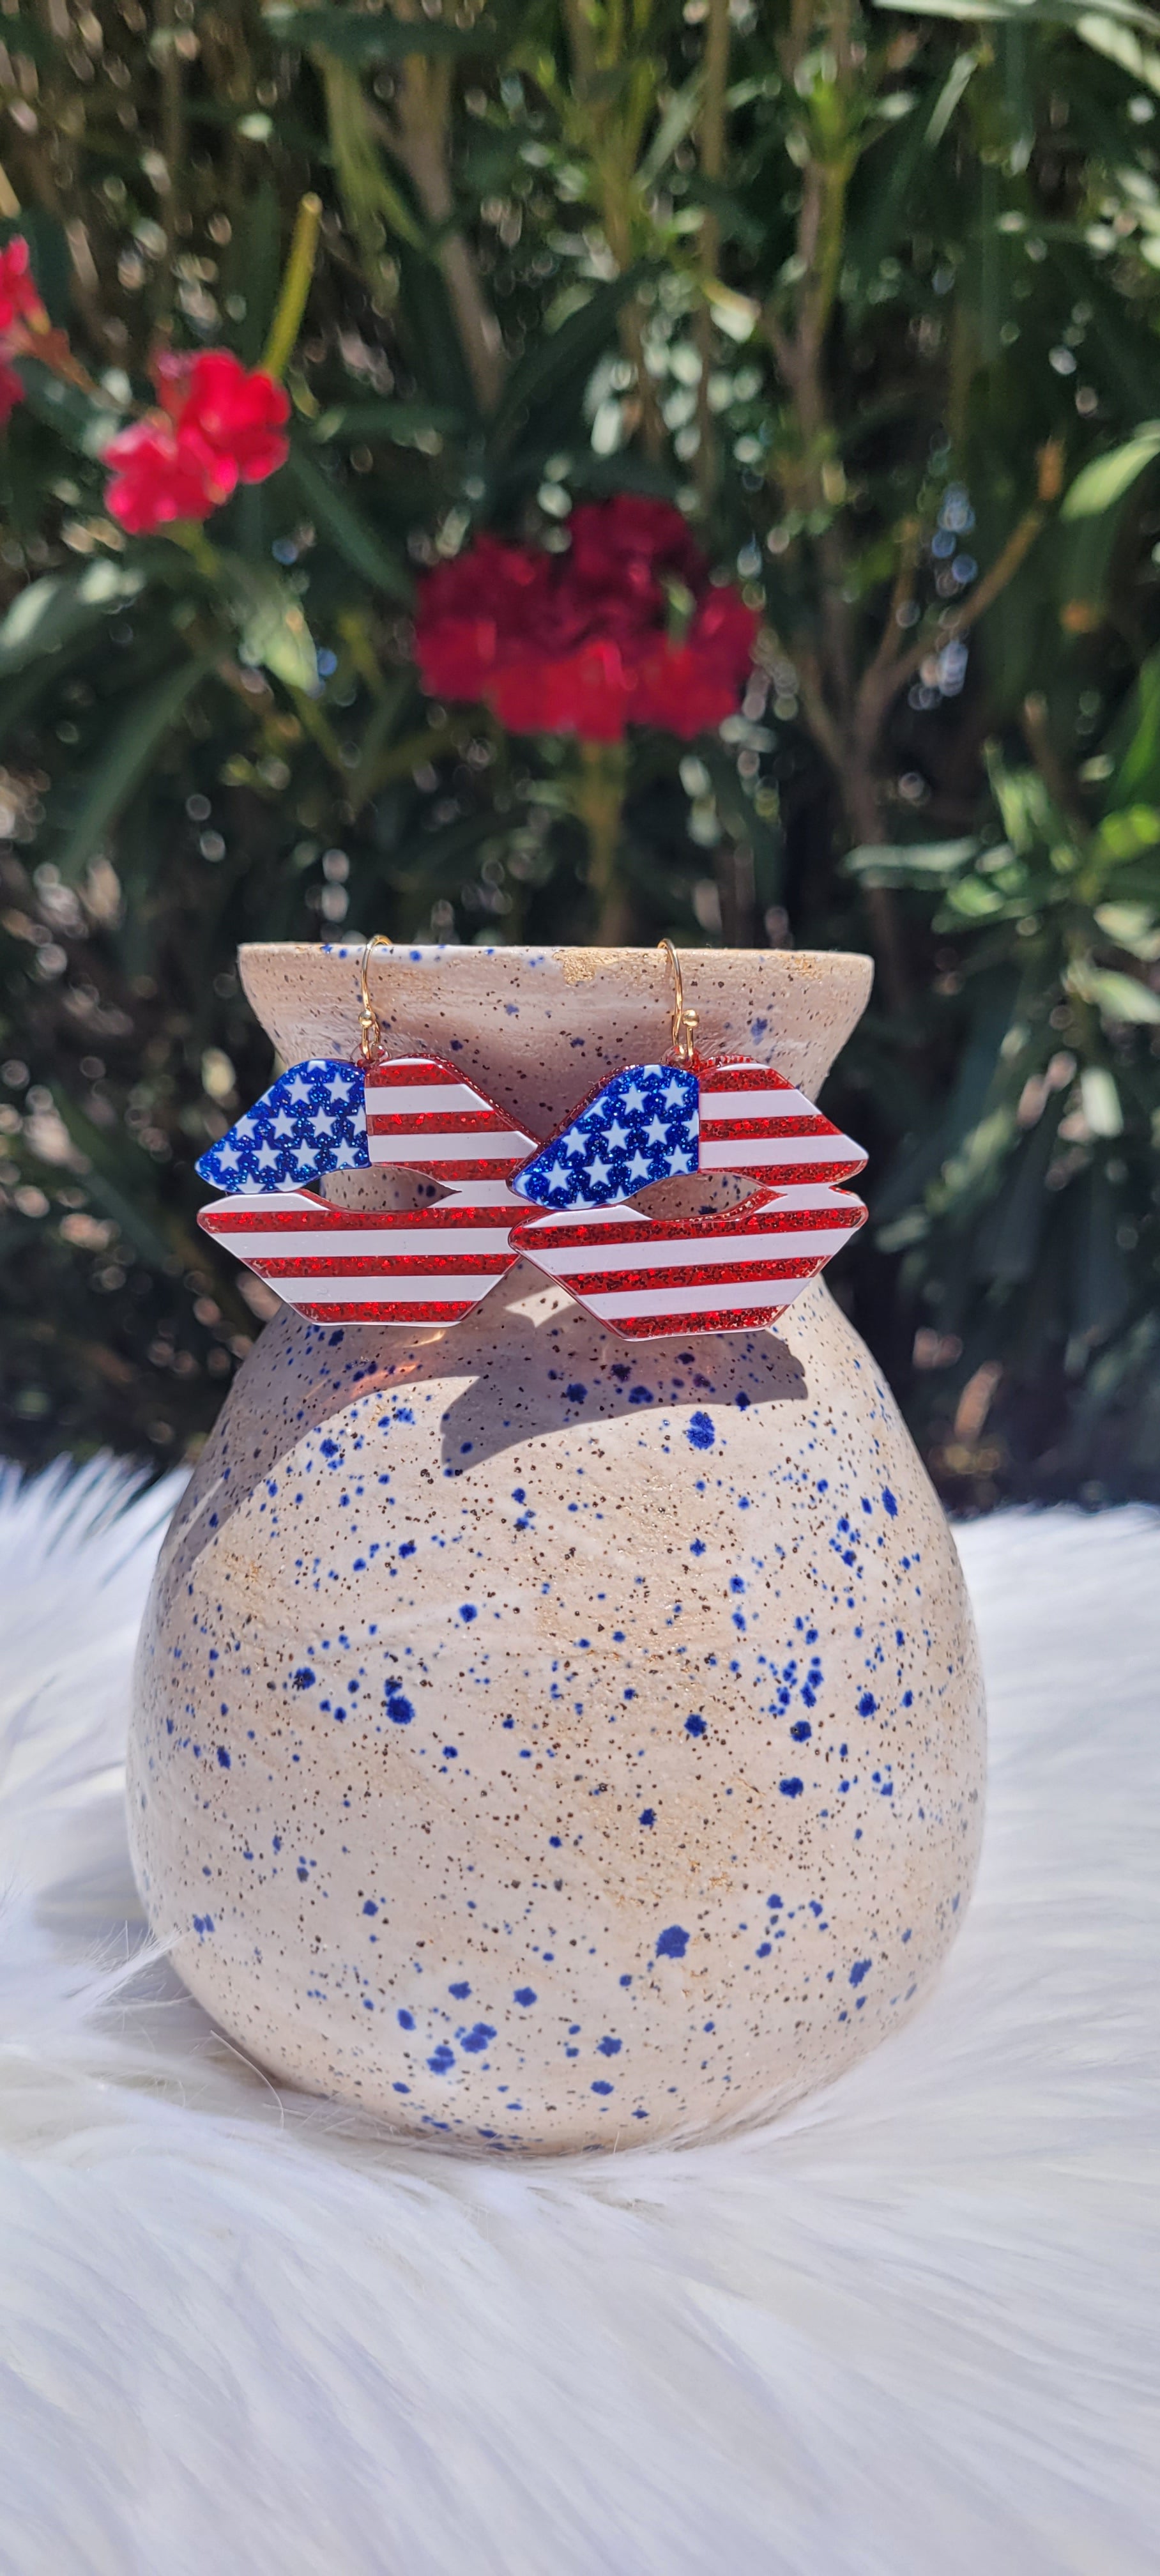 Lip shape American flag print Blue and red glitter Epoxy material Light weight Brushed gold fish hook dangle earrings Rubber earring back Whether you want to be on the wild side or classy this earring set it will add a fun touch to your outfit